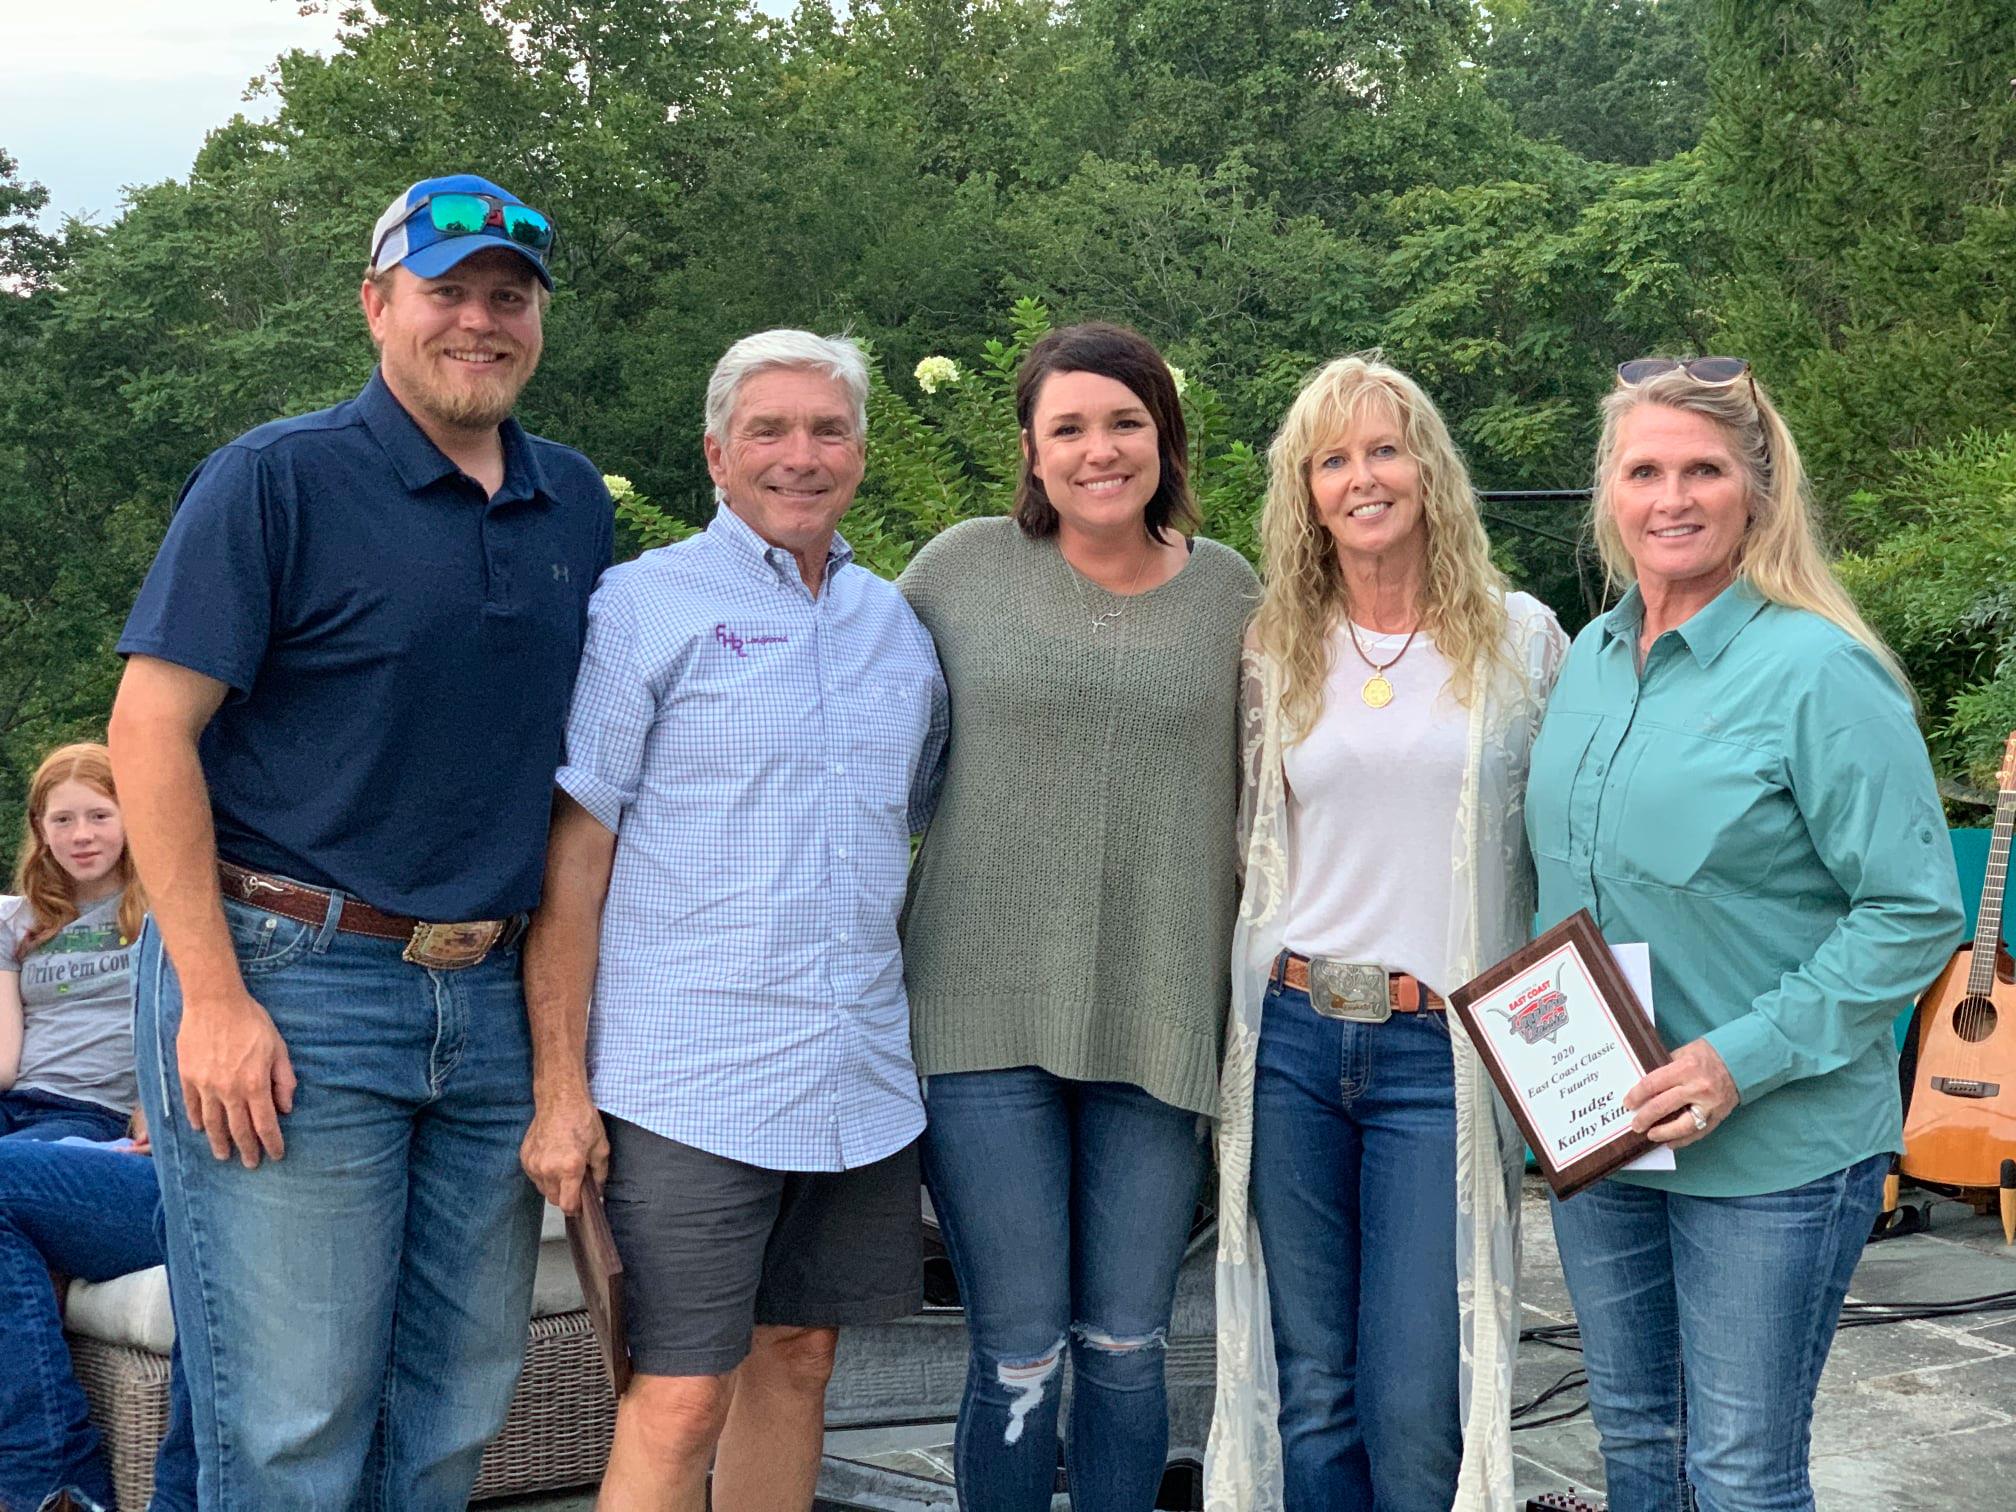 Sale Hosts and Hired Hand customers Chase Vasut and Ann Gravett along with Futurity judges and Hired Hand customers Dale Metz, FHR Longhorns; Angie Wulf, 4 Oaks Farm and Kathy Kittler, Broken Spur Ranch